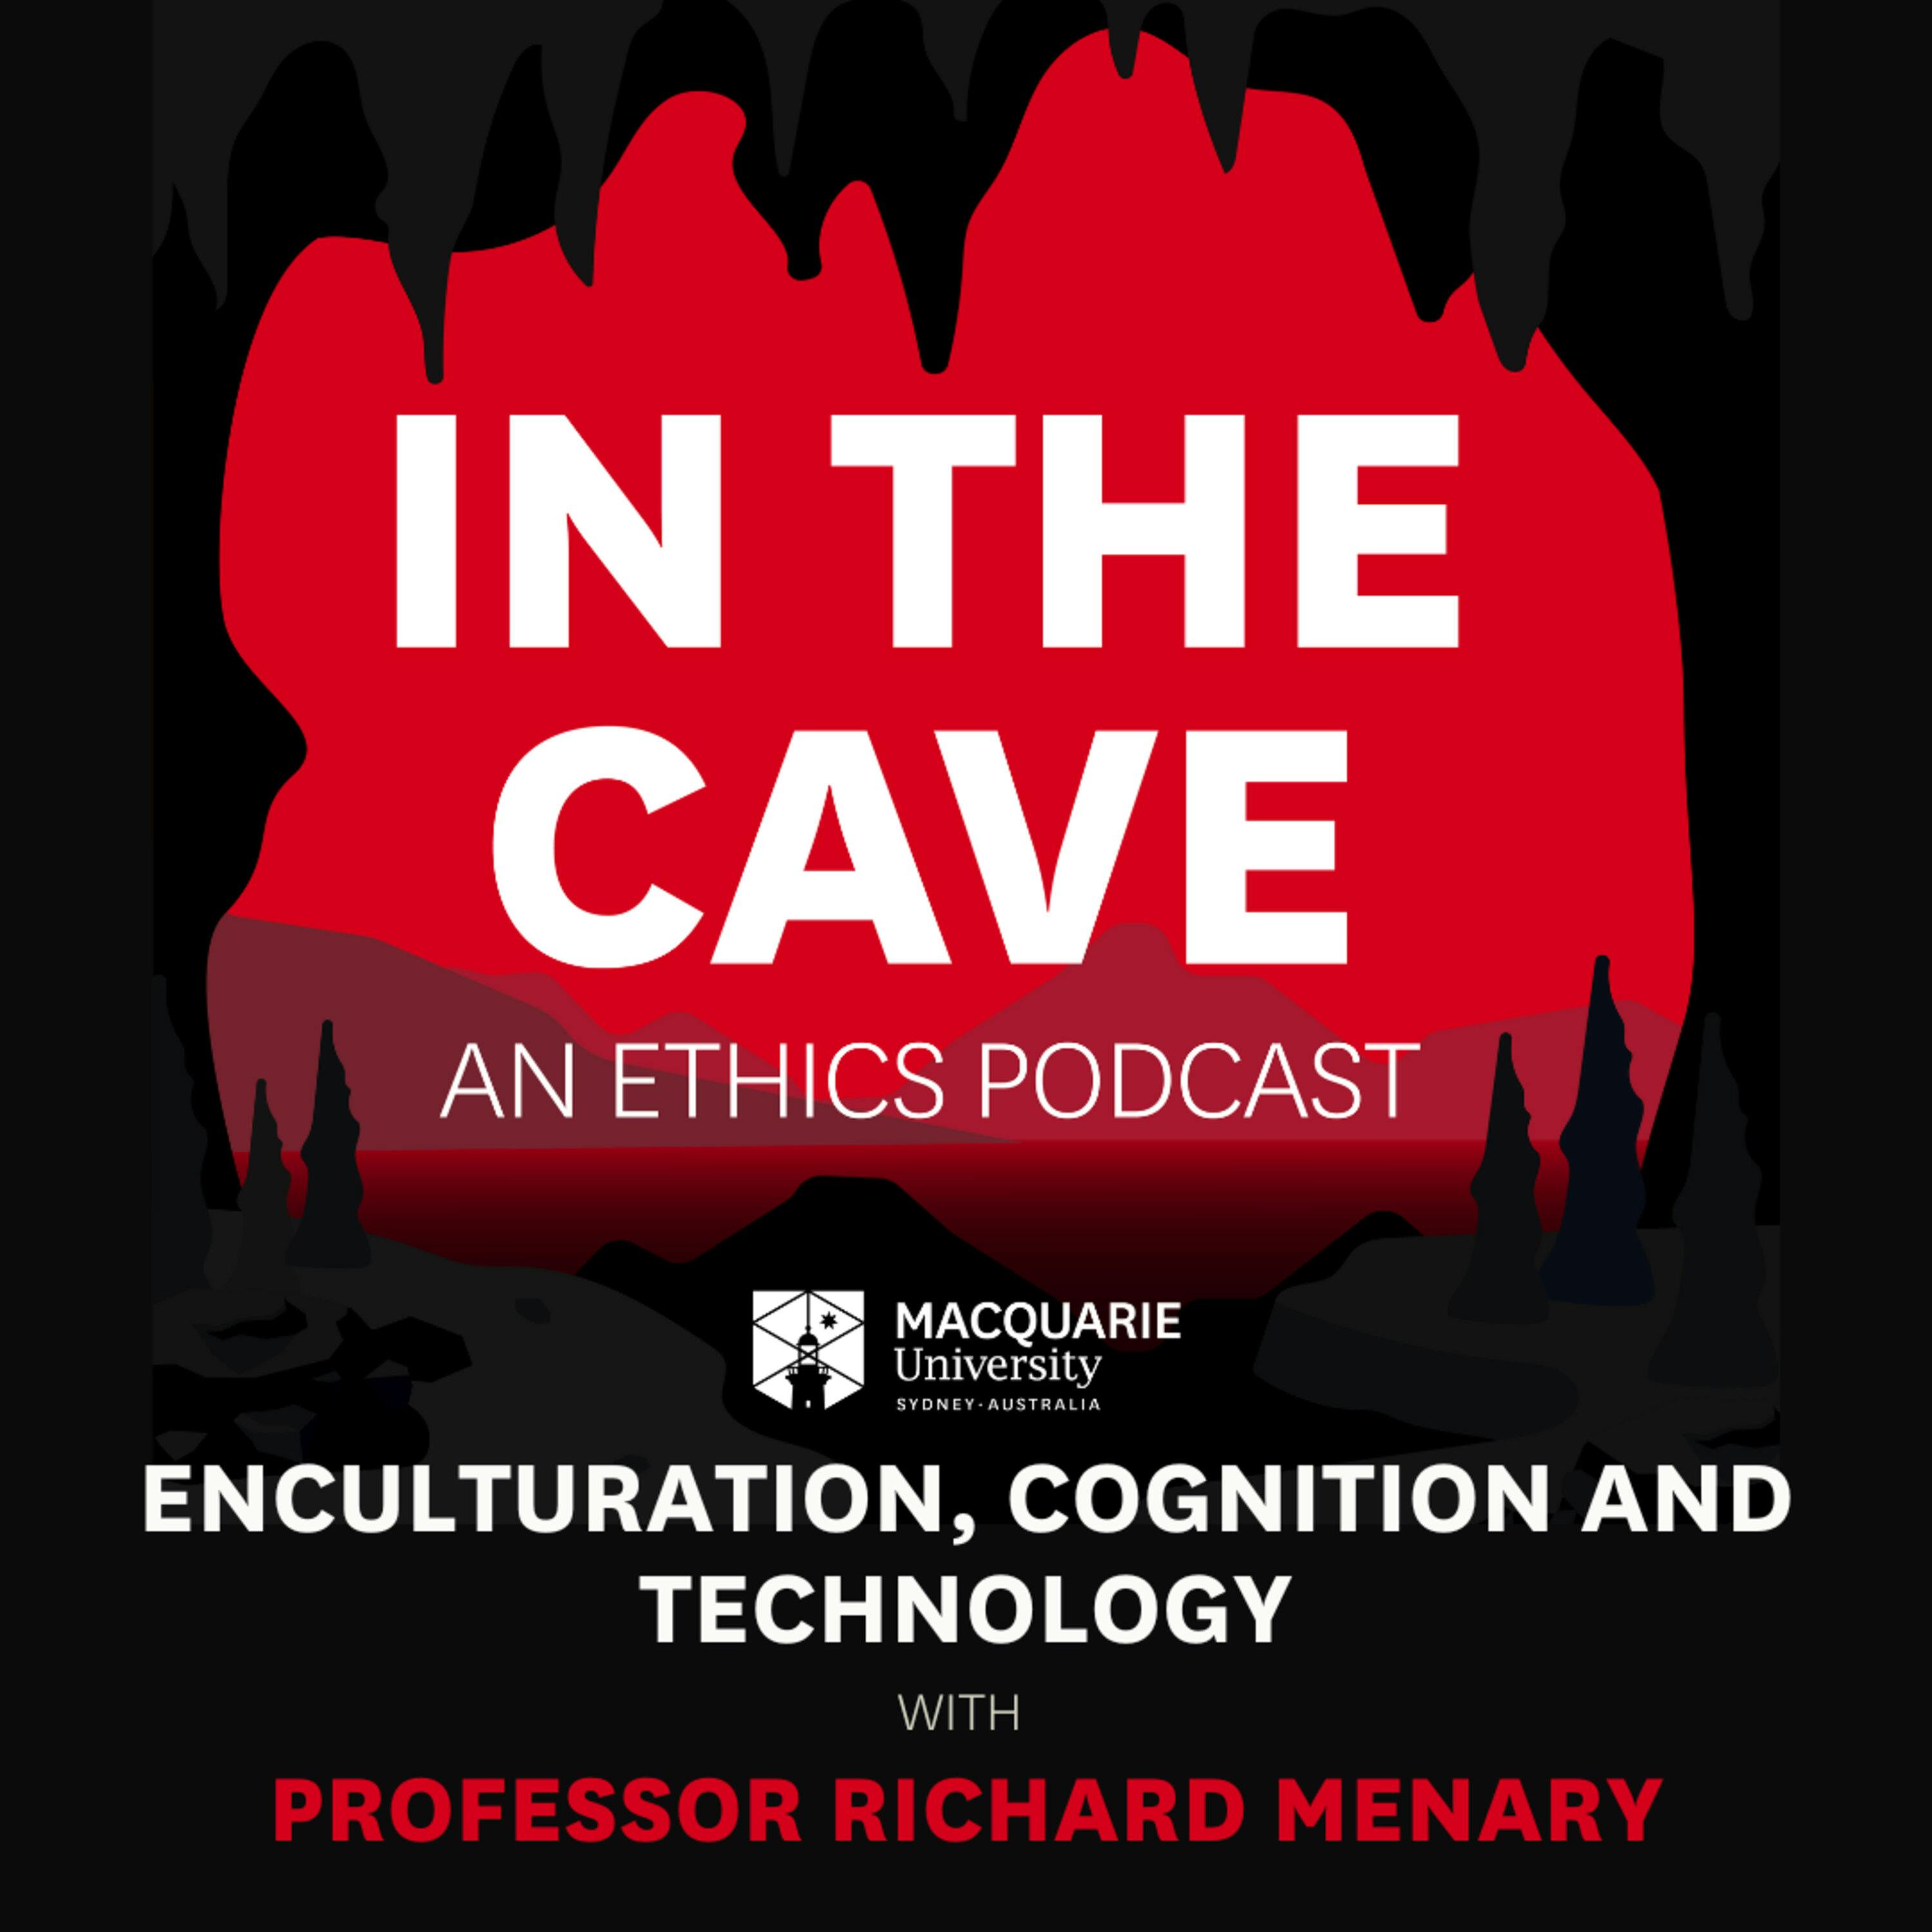 Enculturation, Cognition and Technology with Professor Richard Menary